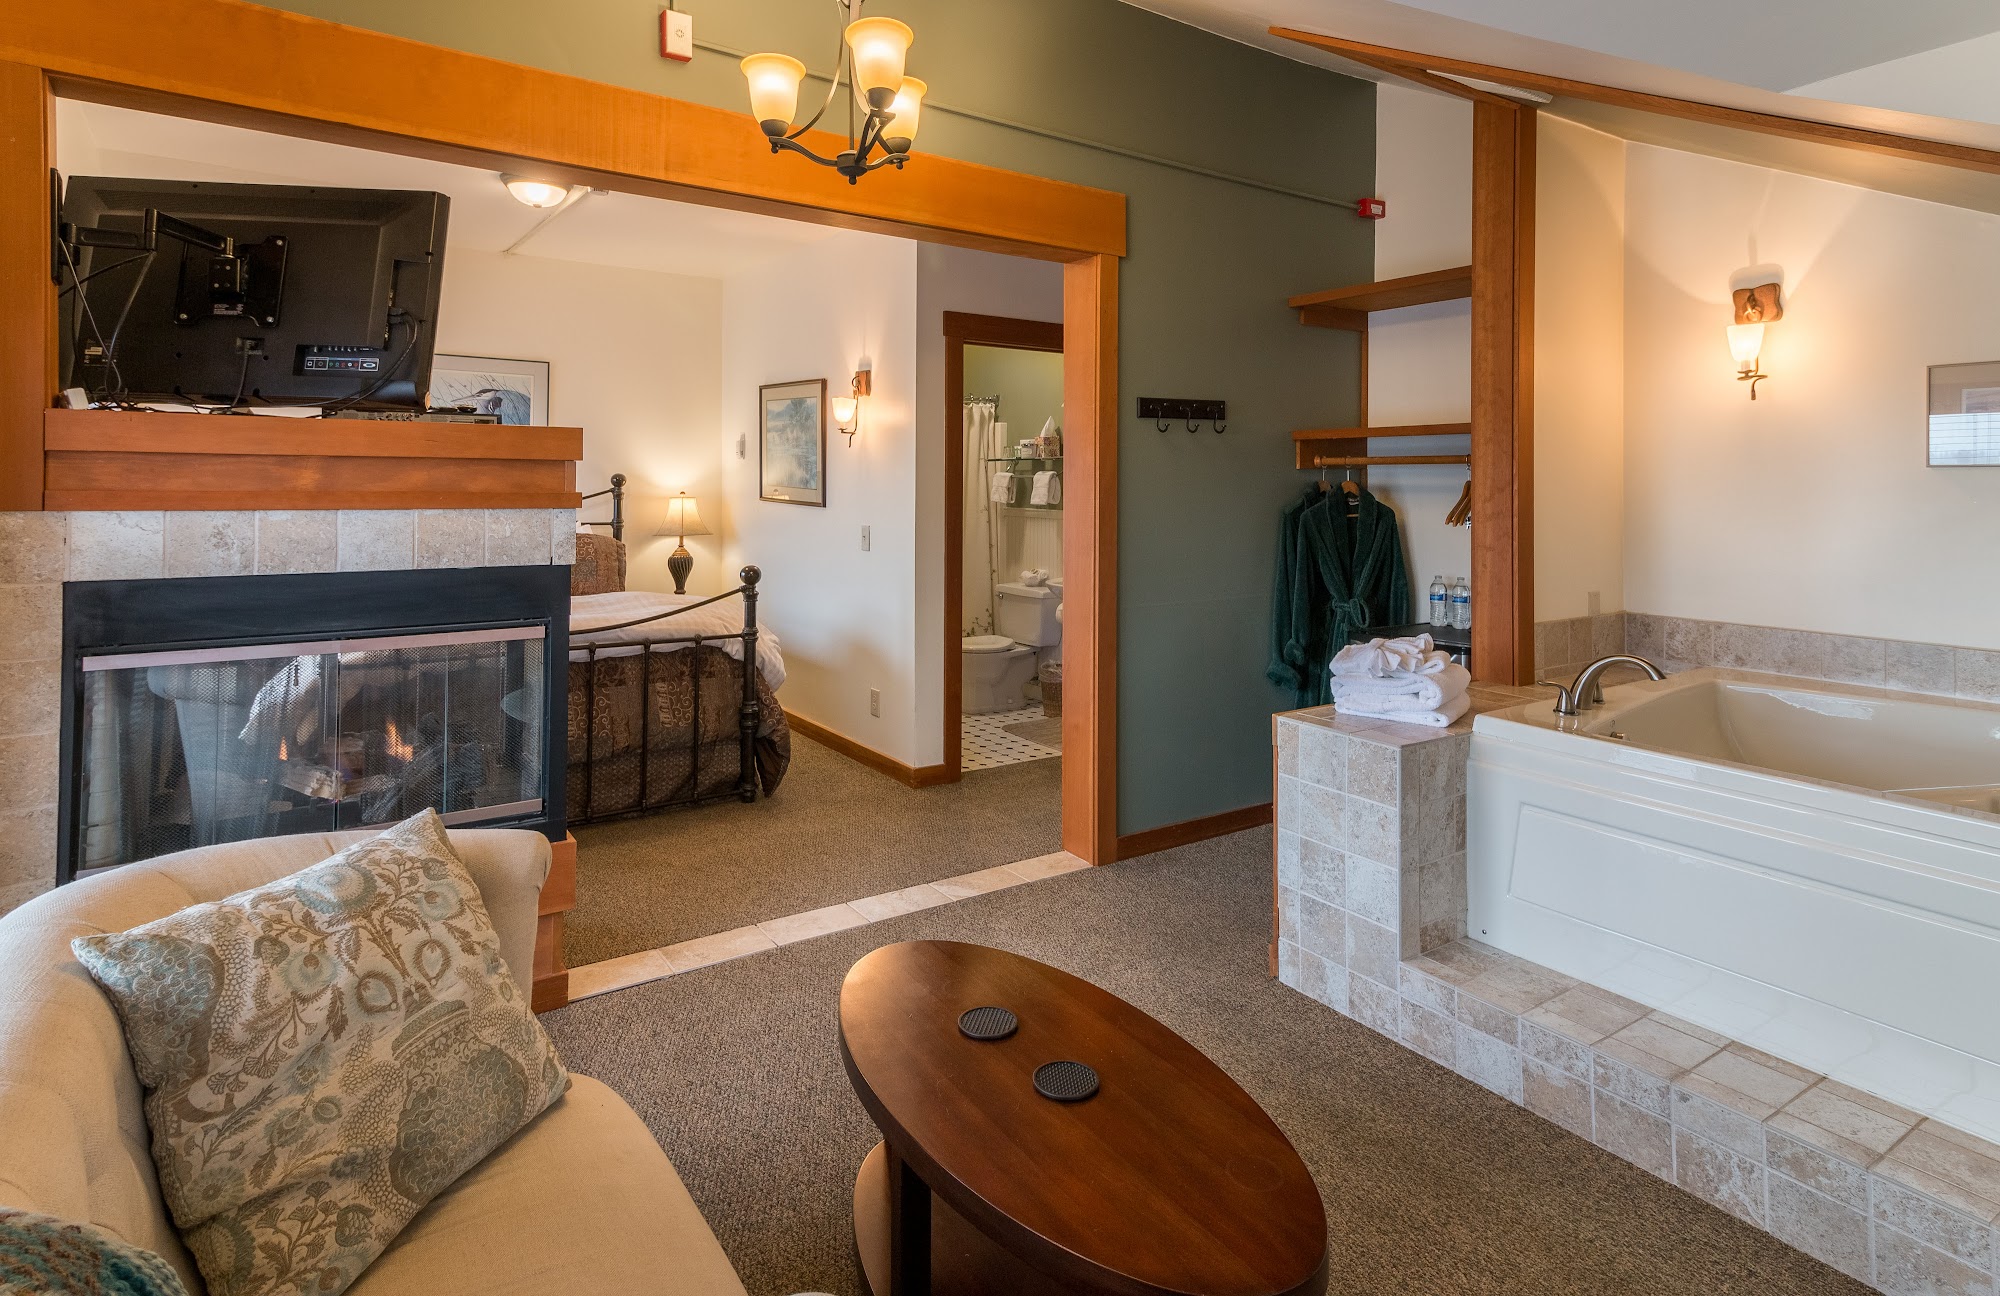 The Heron Inn and Day Spa - A Bed & Breakfast